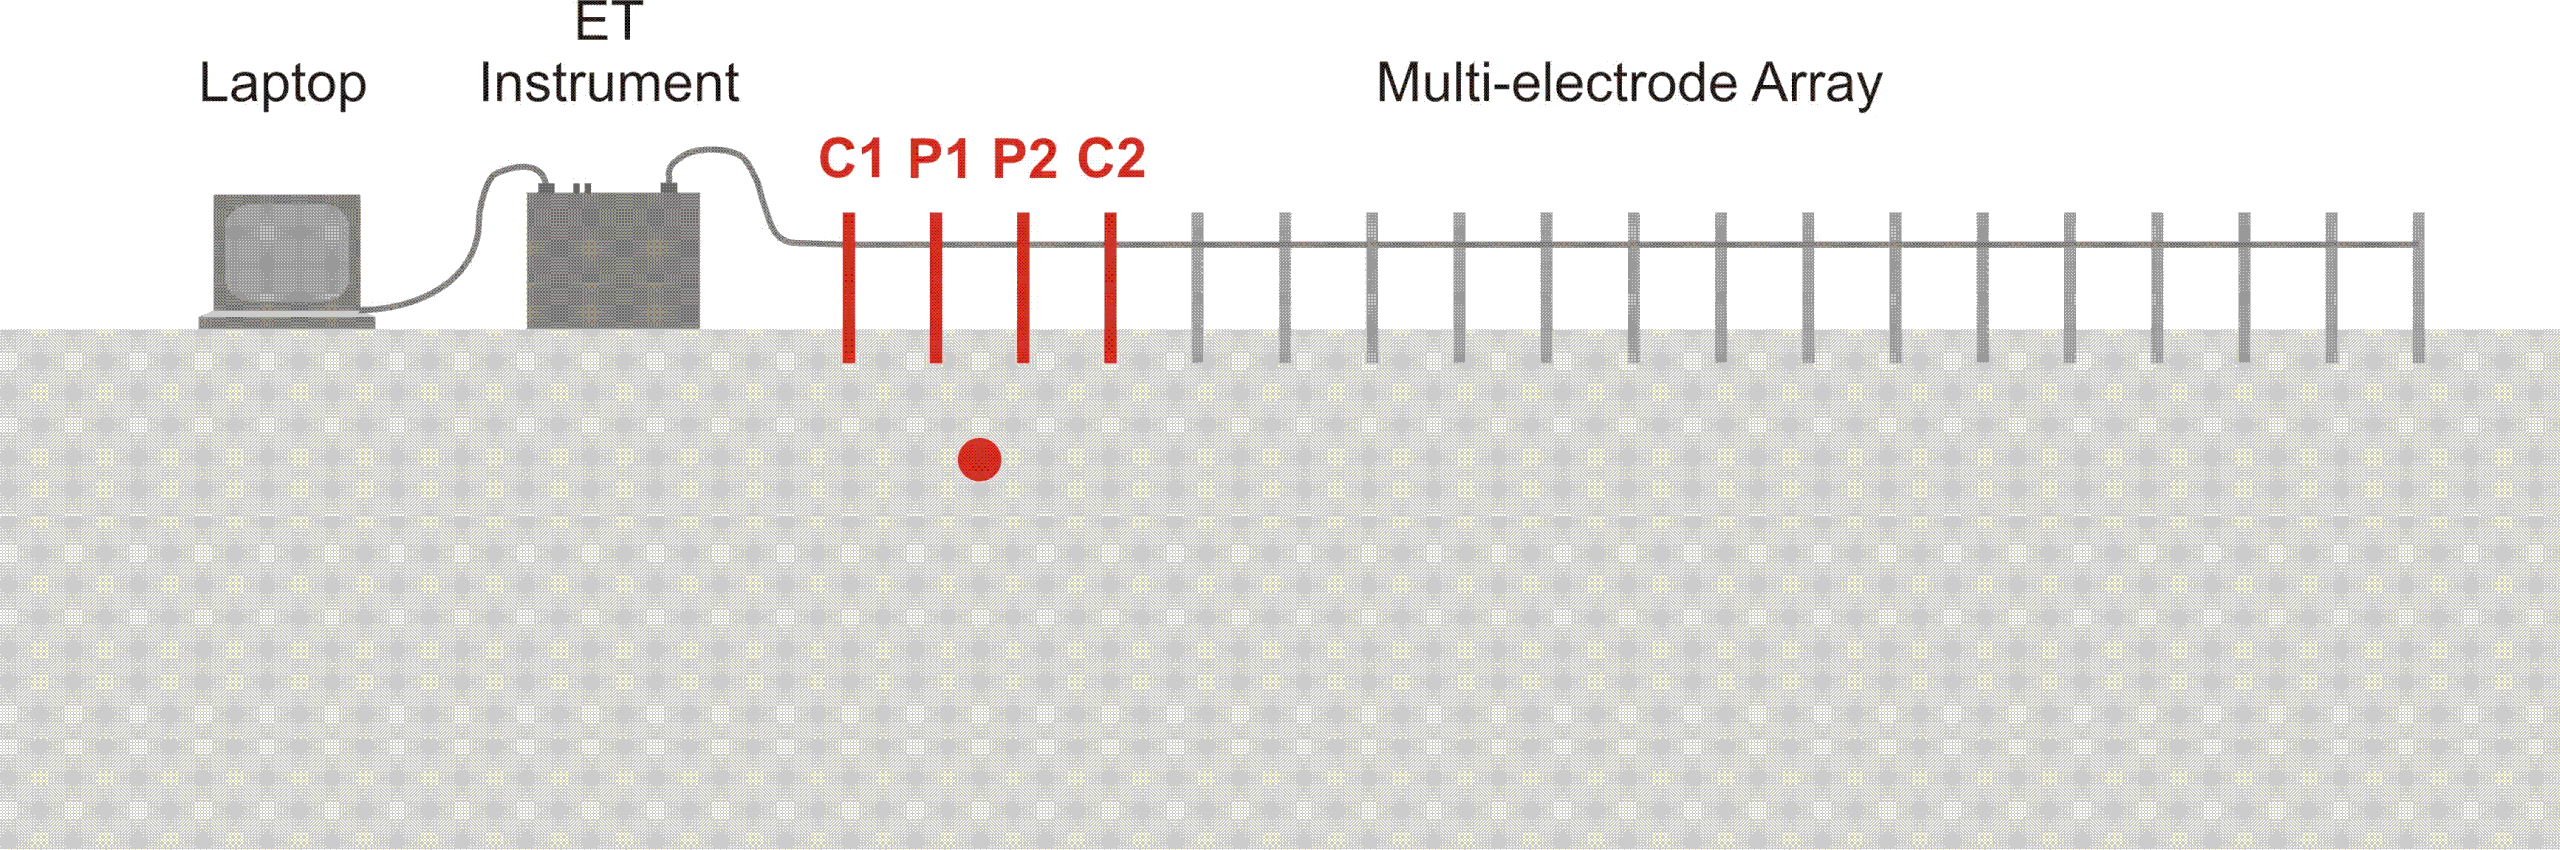 Animation showing the centre of the sampled zone for measurements of various electrode spacings.